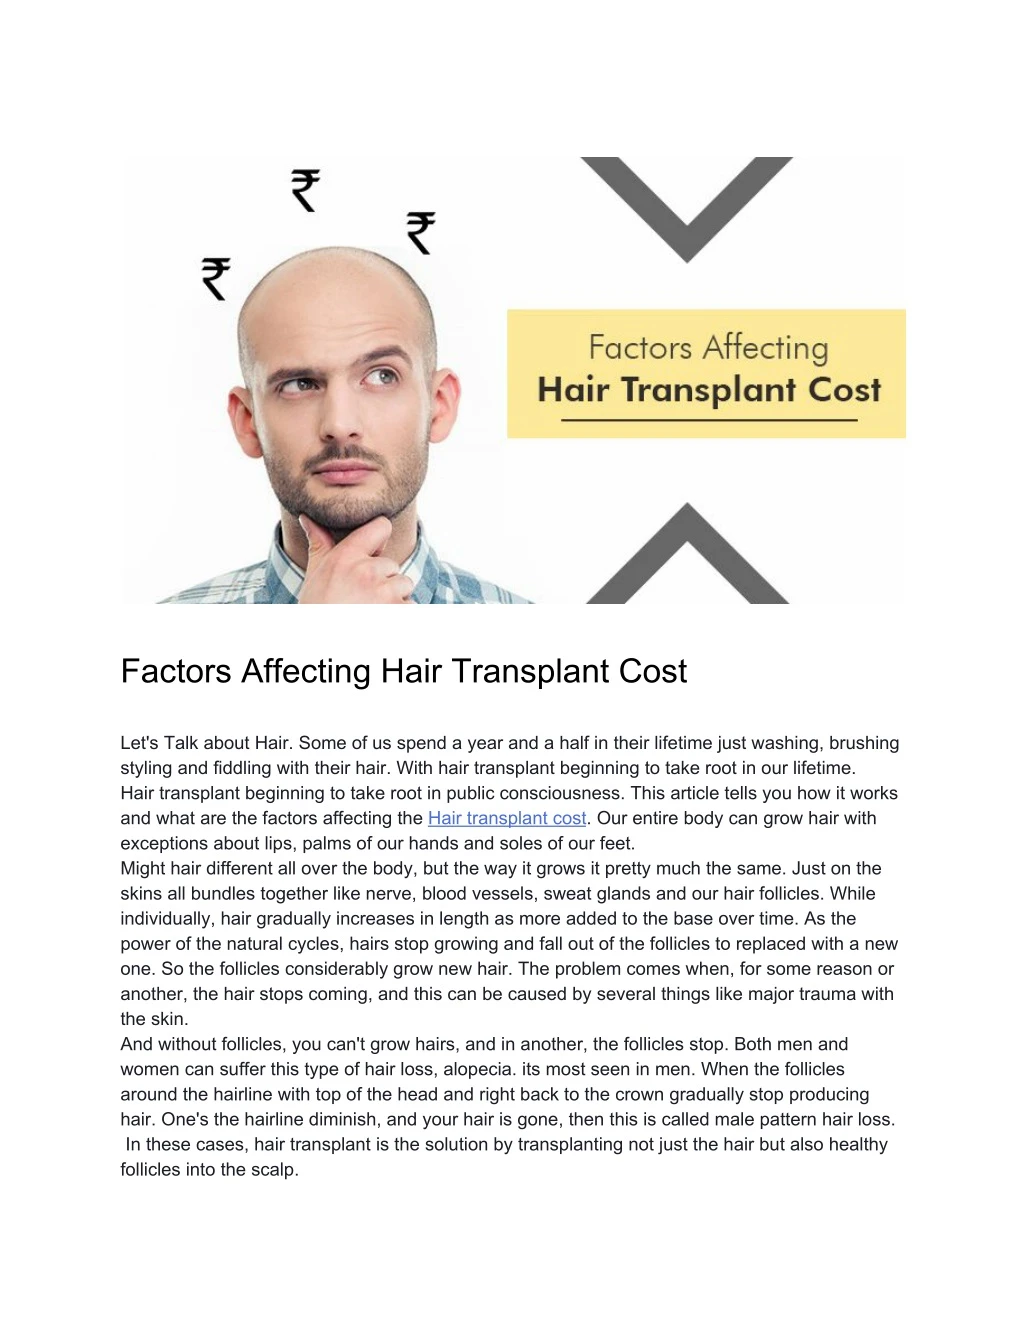 factors affecting hair transplant cost